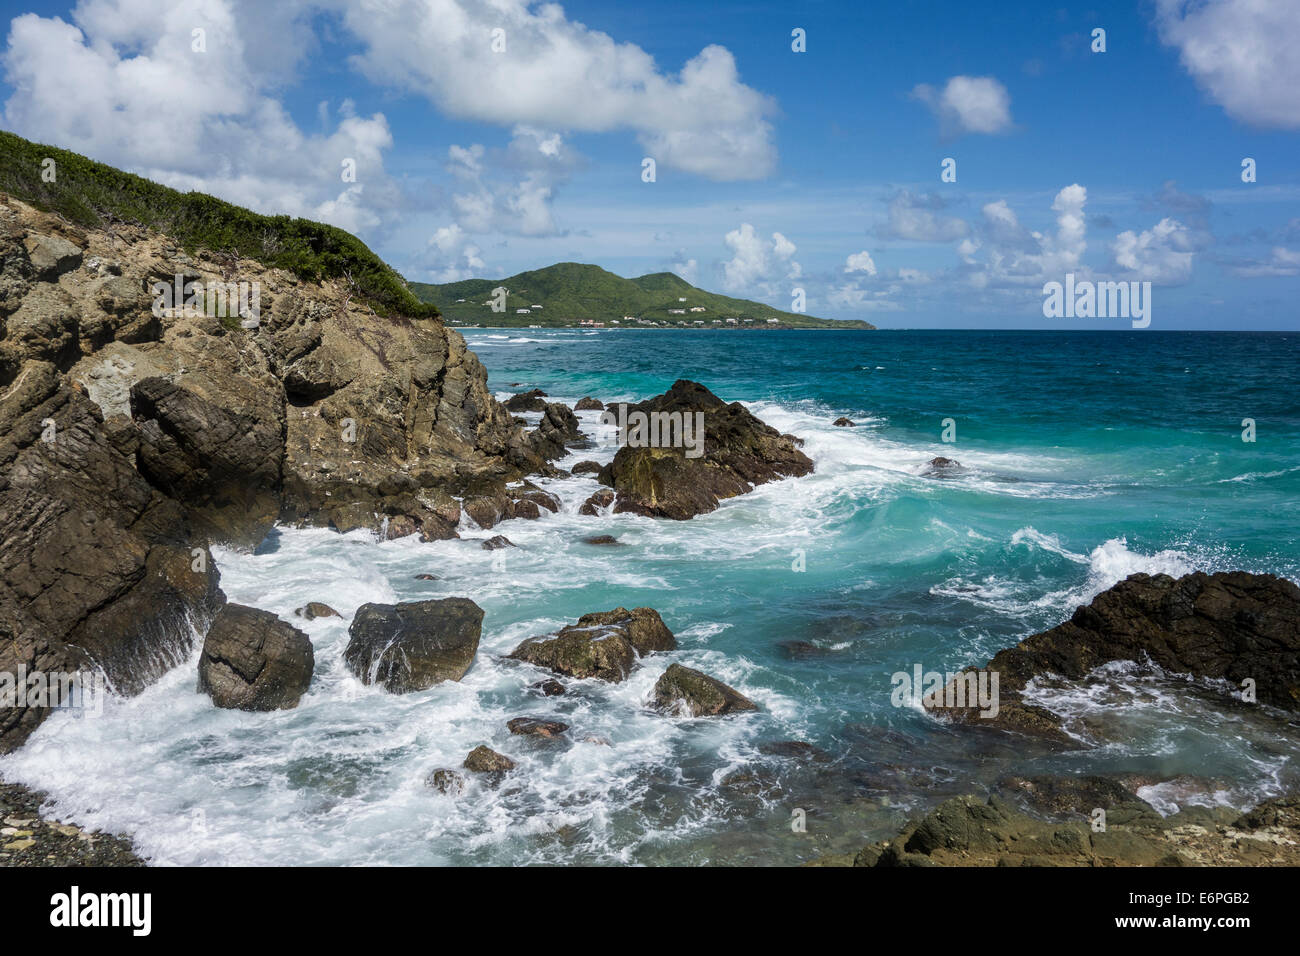 a-view-of-the-rugged-coastline-and-carib